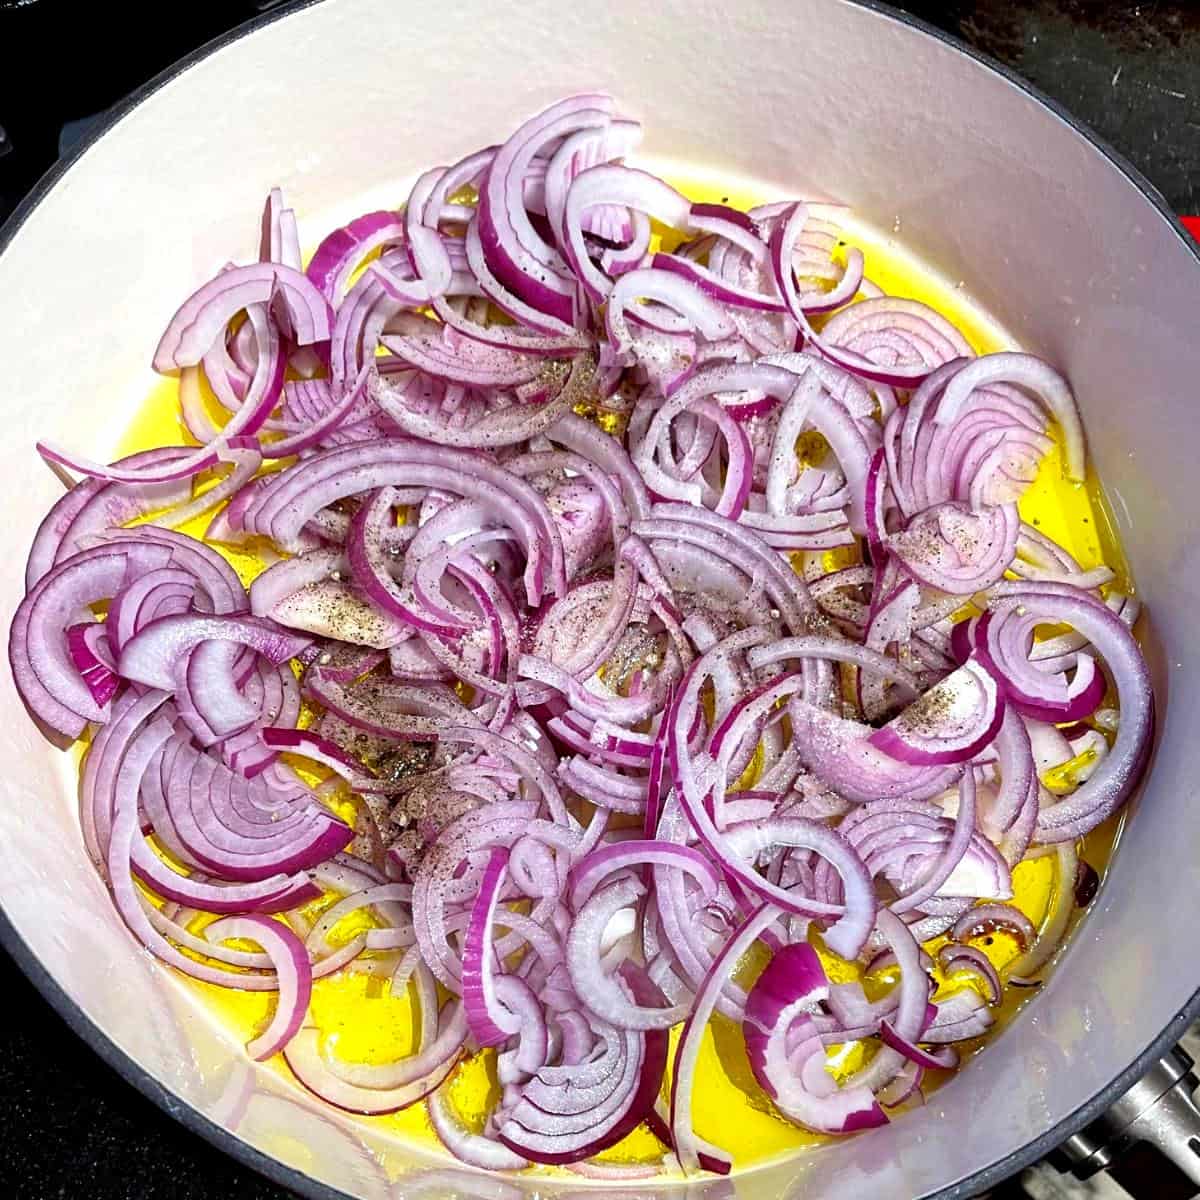 Onions frying in olive oil.